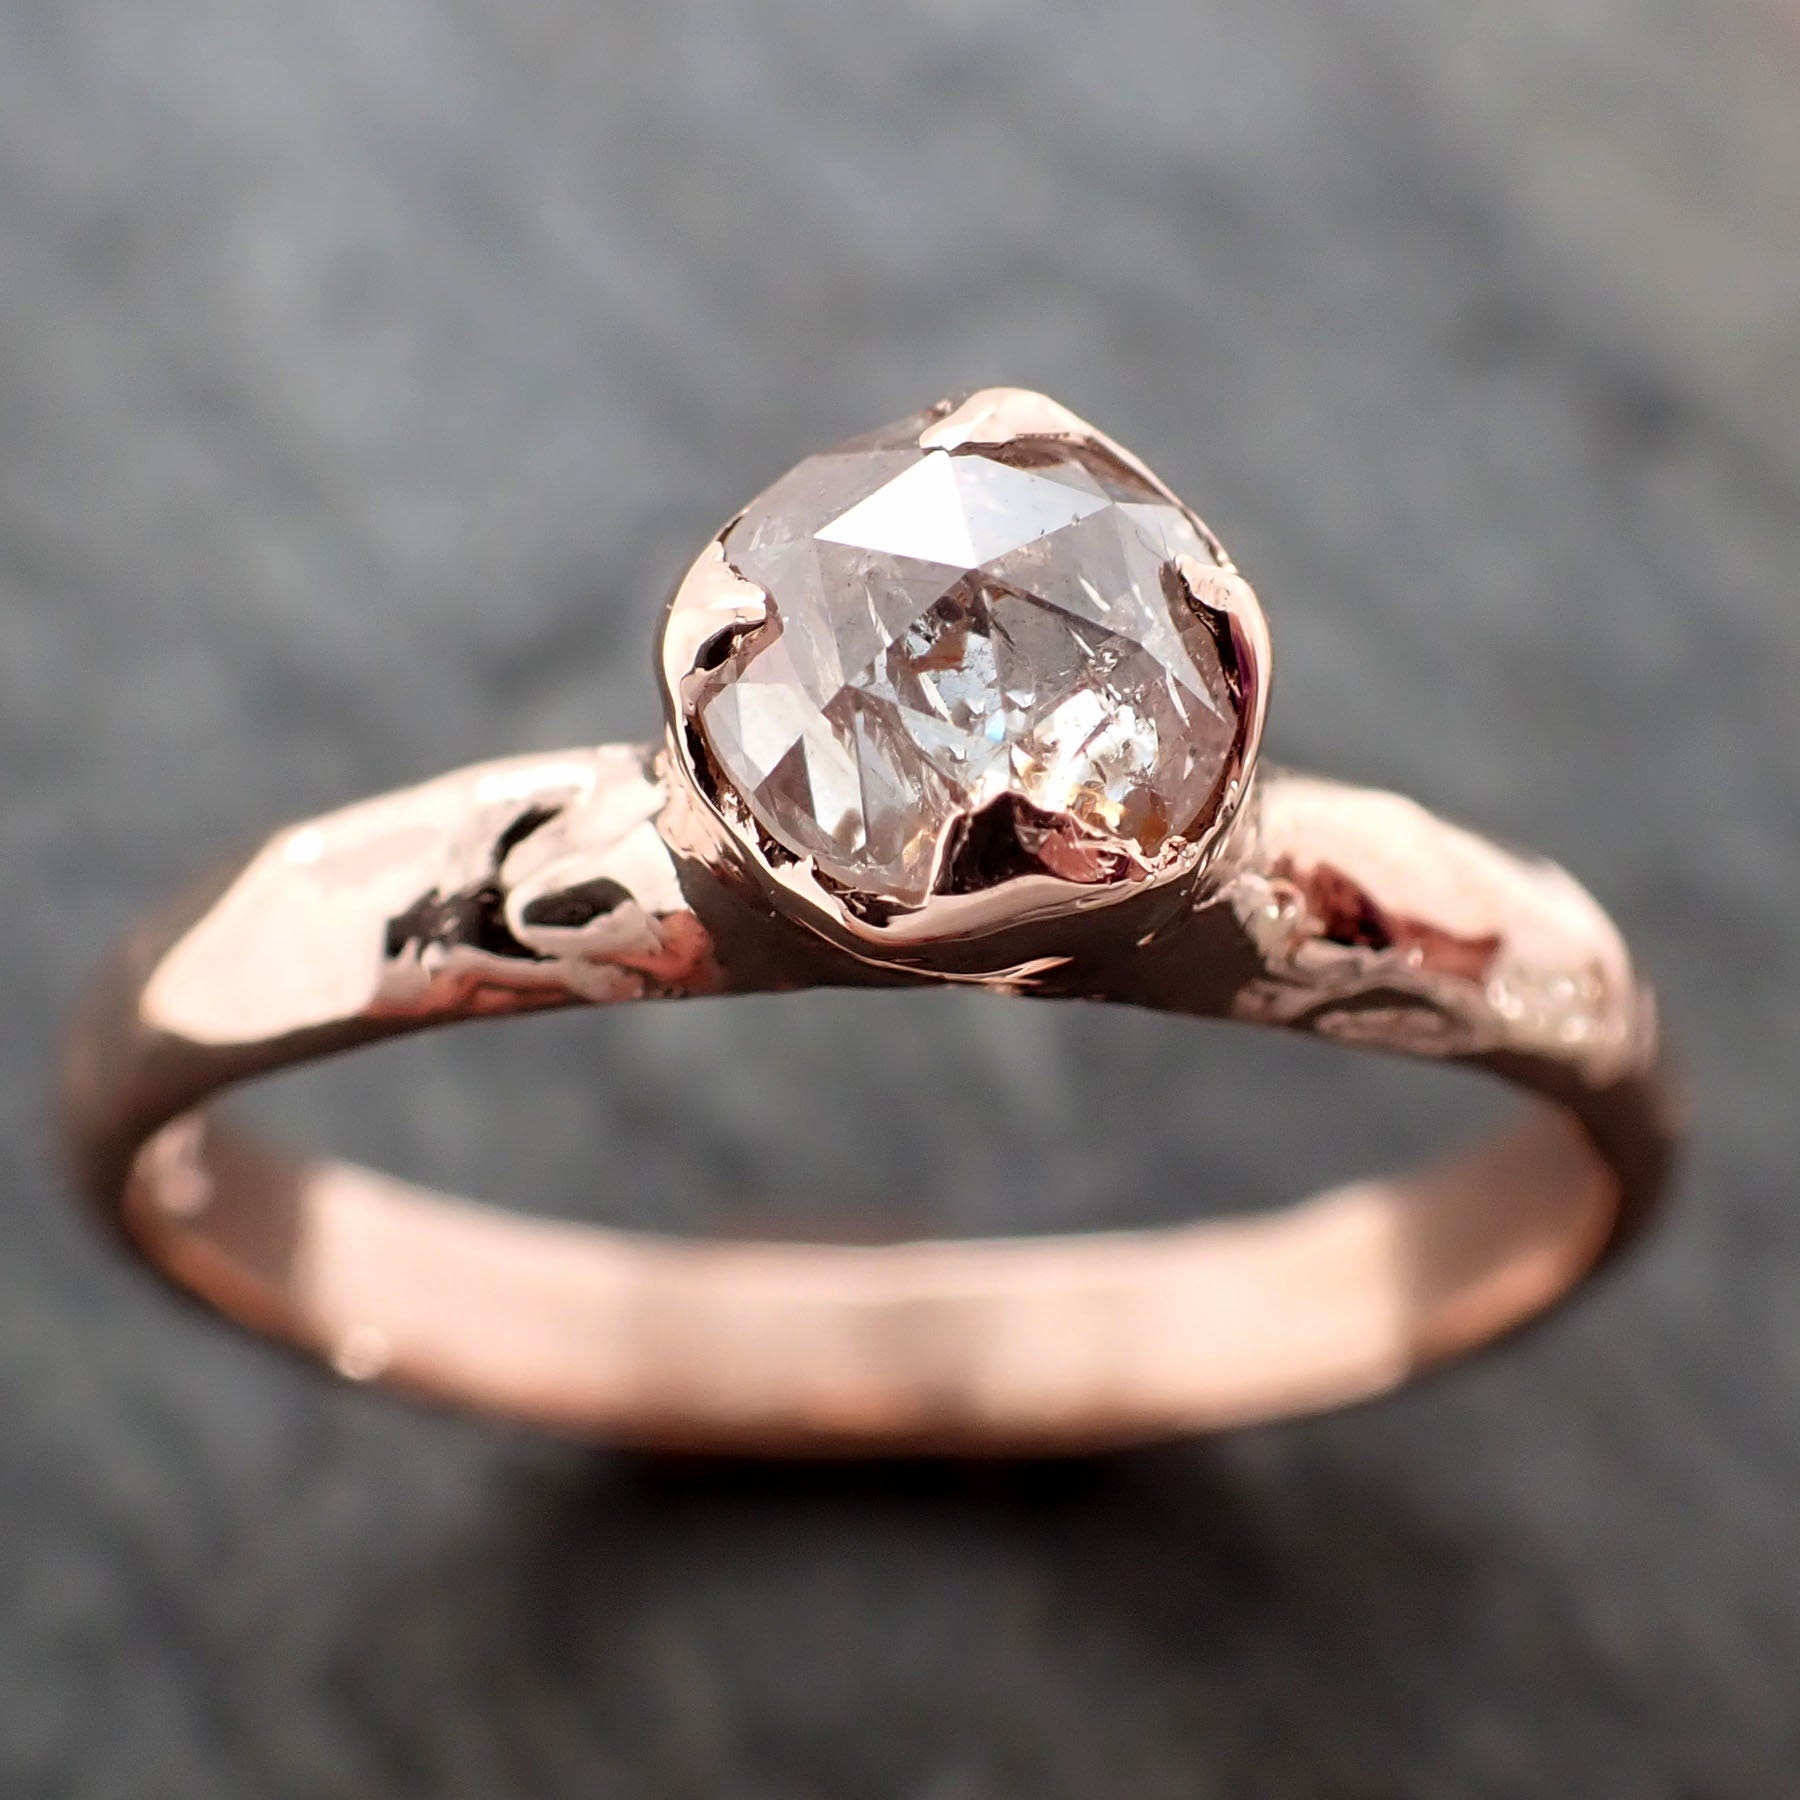 Faceted Fancy cut White Diamond Solitaire Engagement 14k Rose Gold Wedding Ring byAngeline 2909